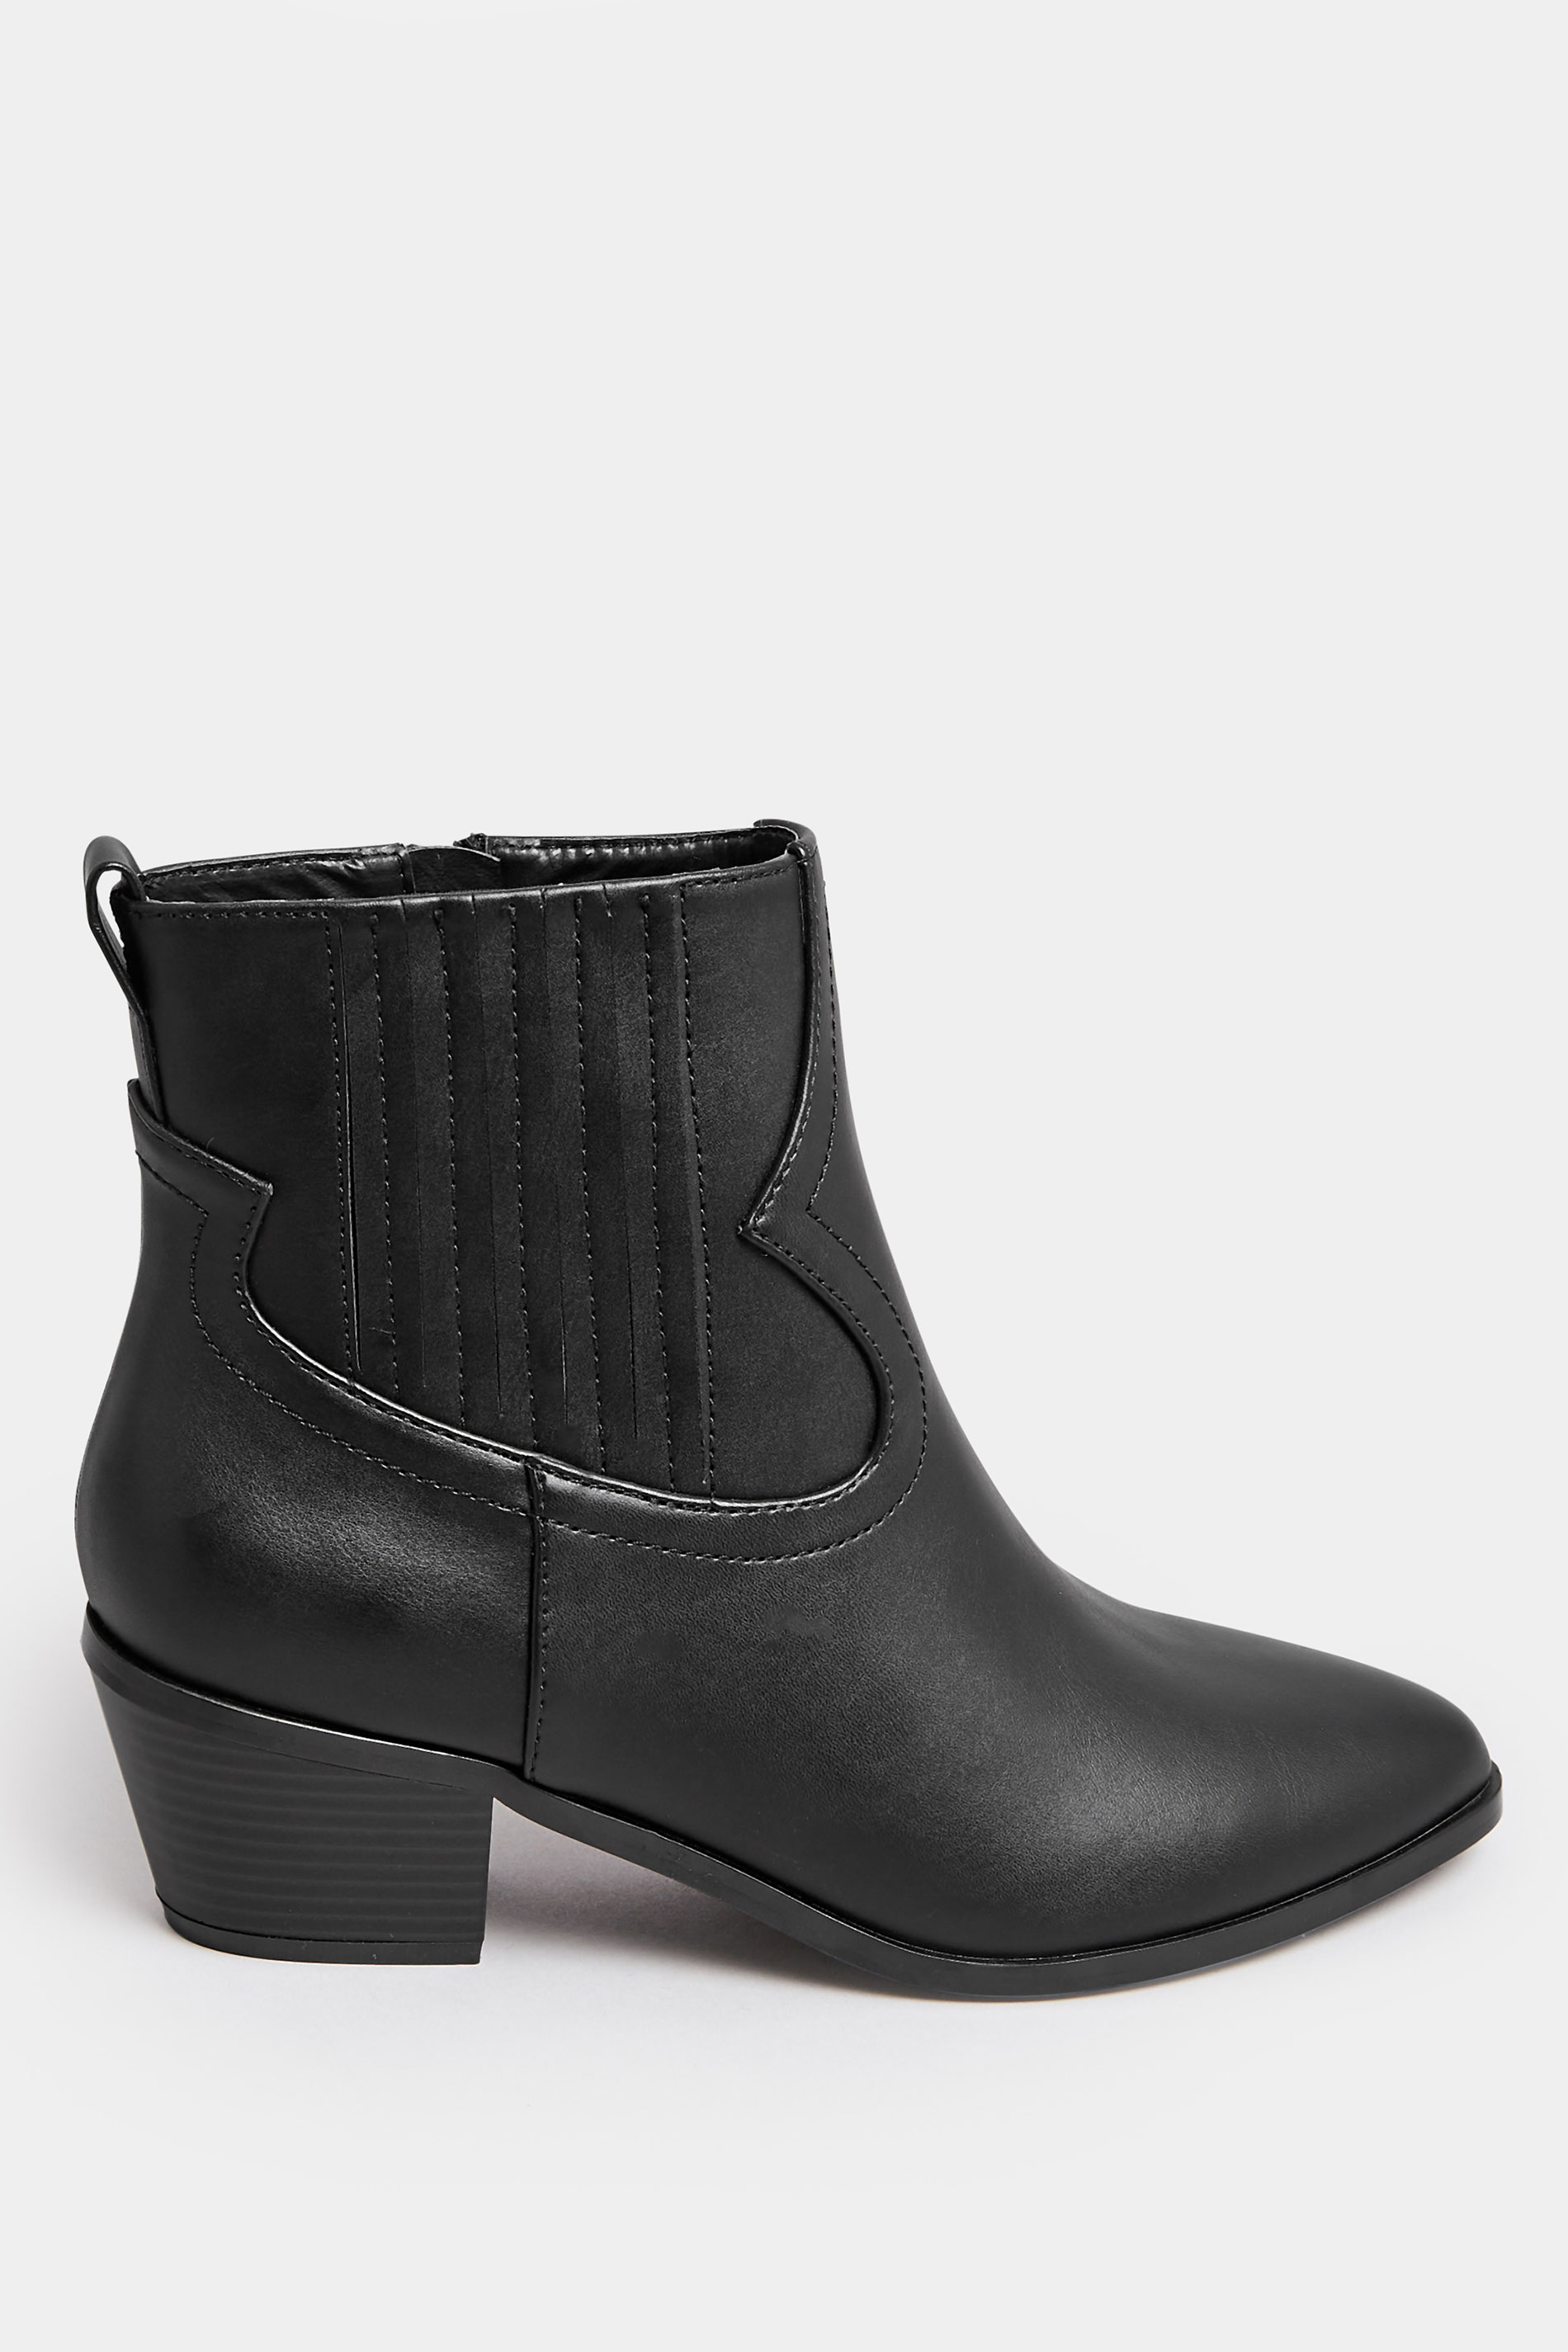 Black Western PU Ankle Boot In Wide E Fit & Extra Wide EEE Fit | Yours Clothing 3